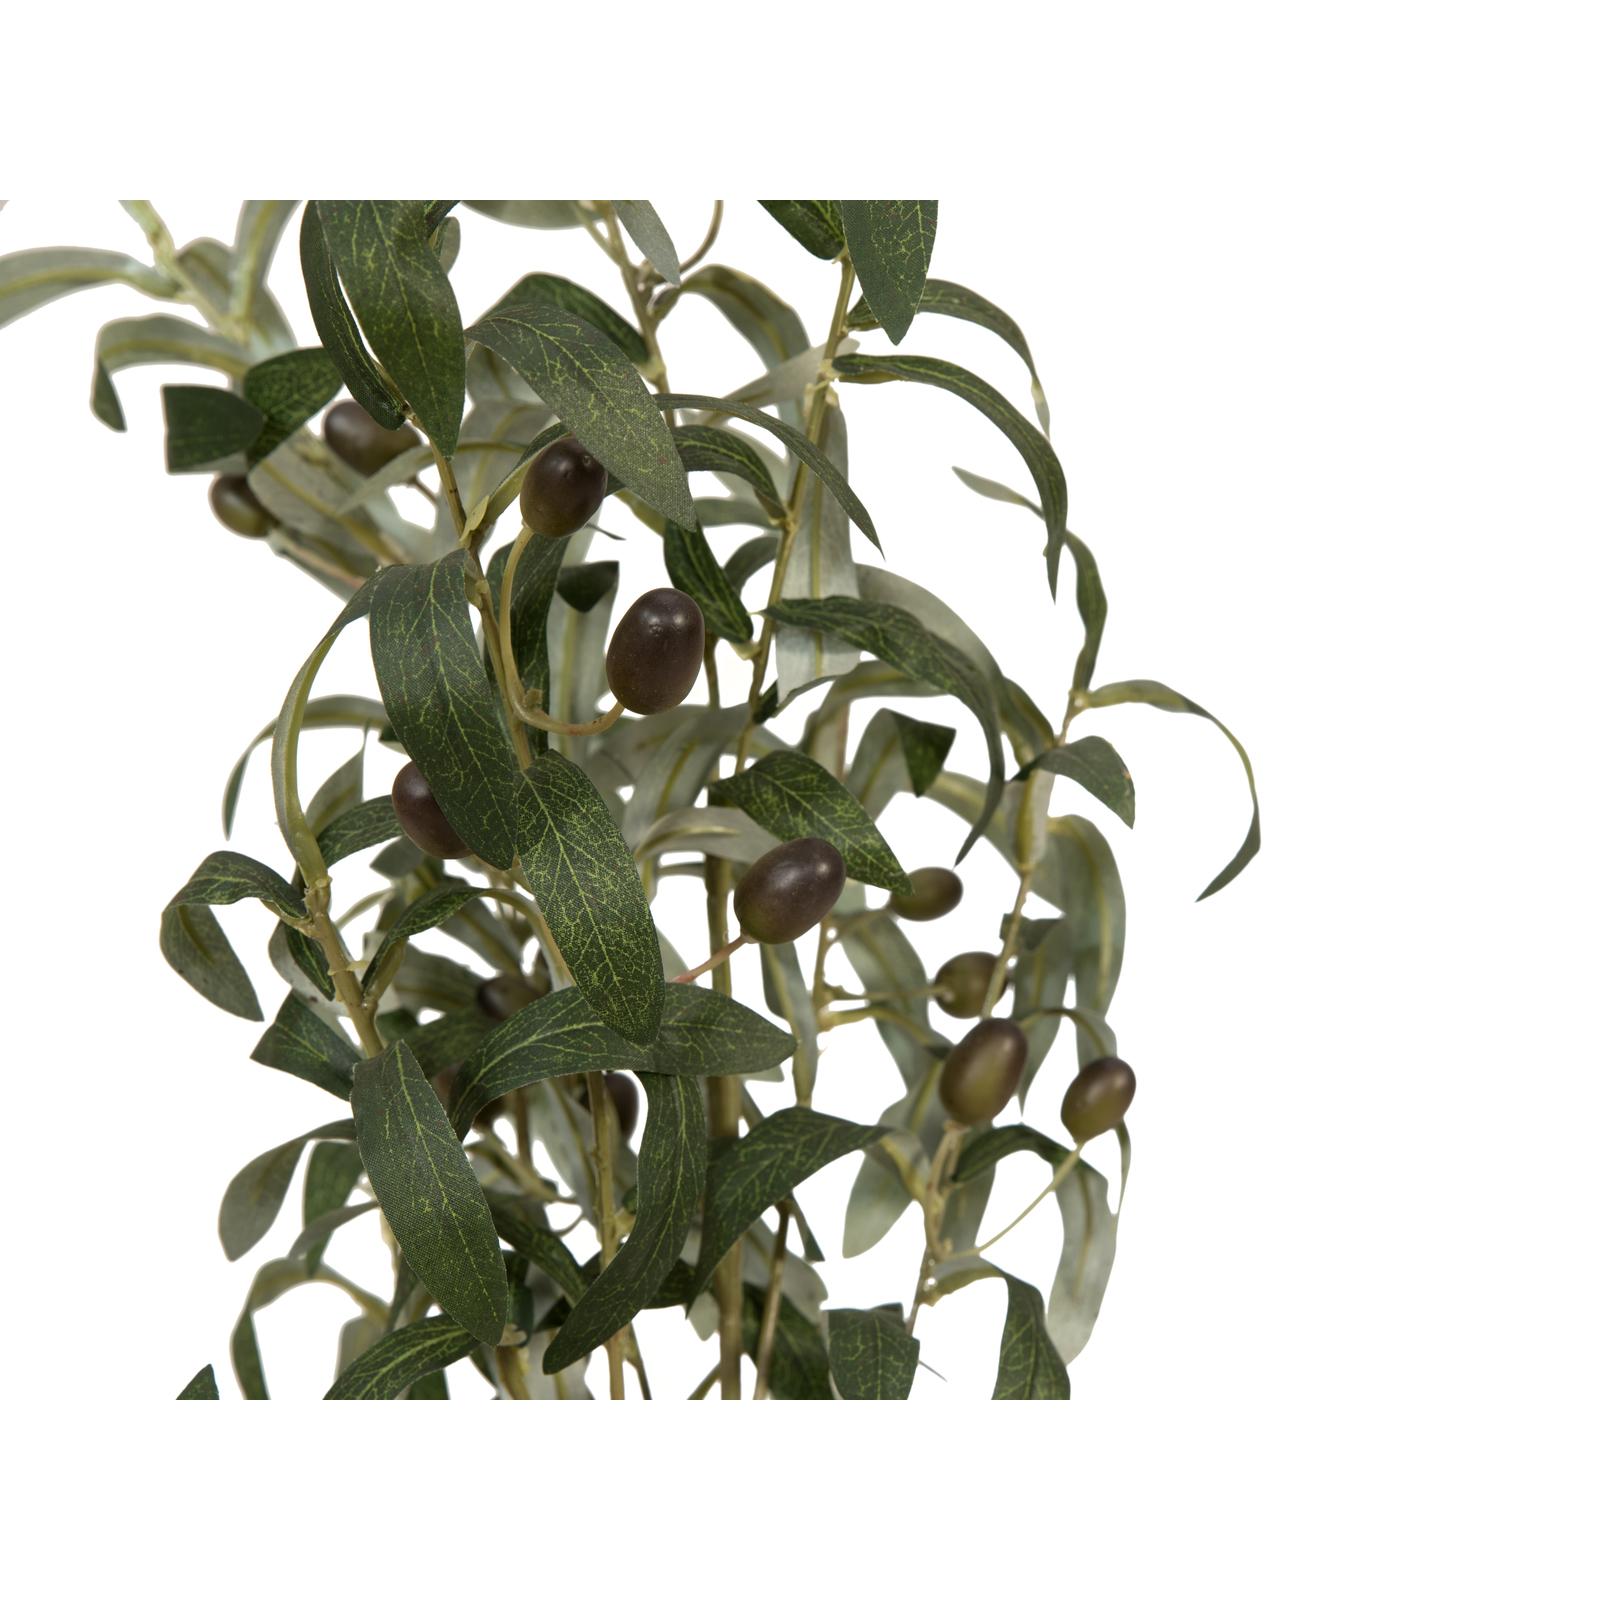 EUROPALMS Olive tree, artificial plant, 104 cm